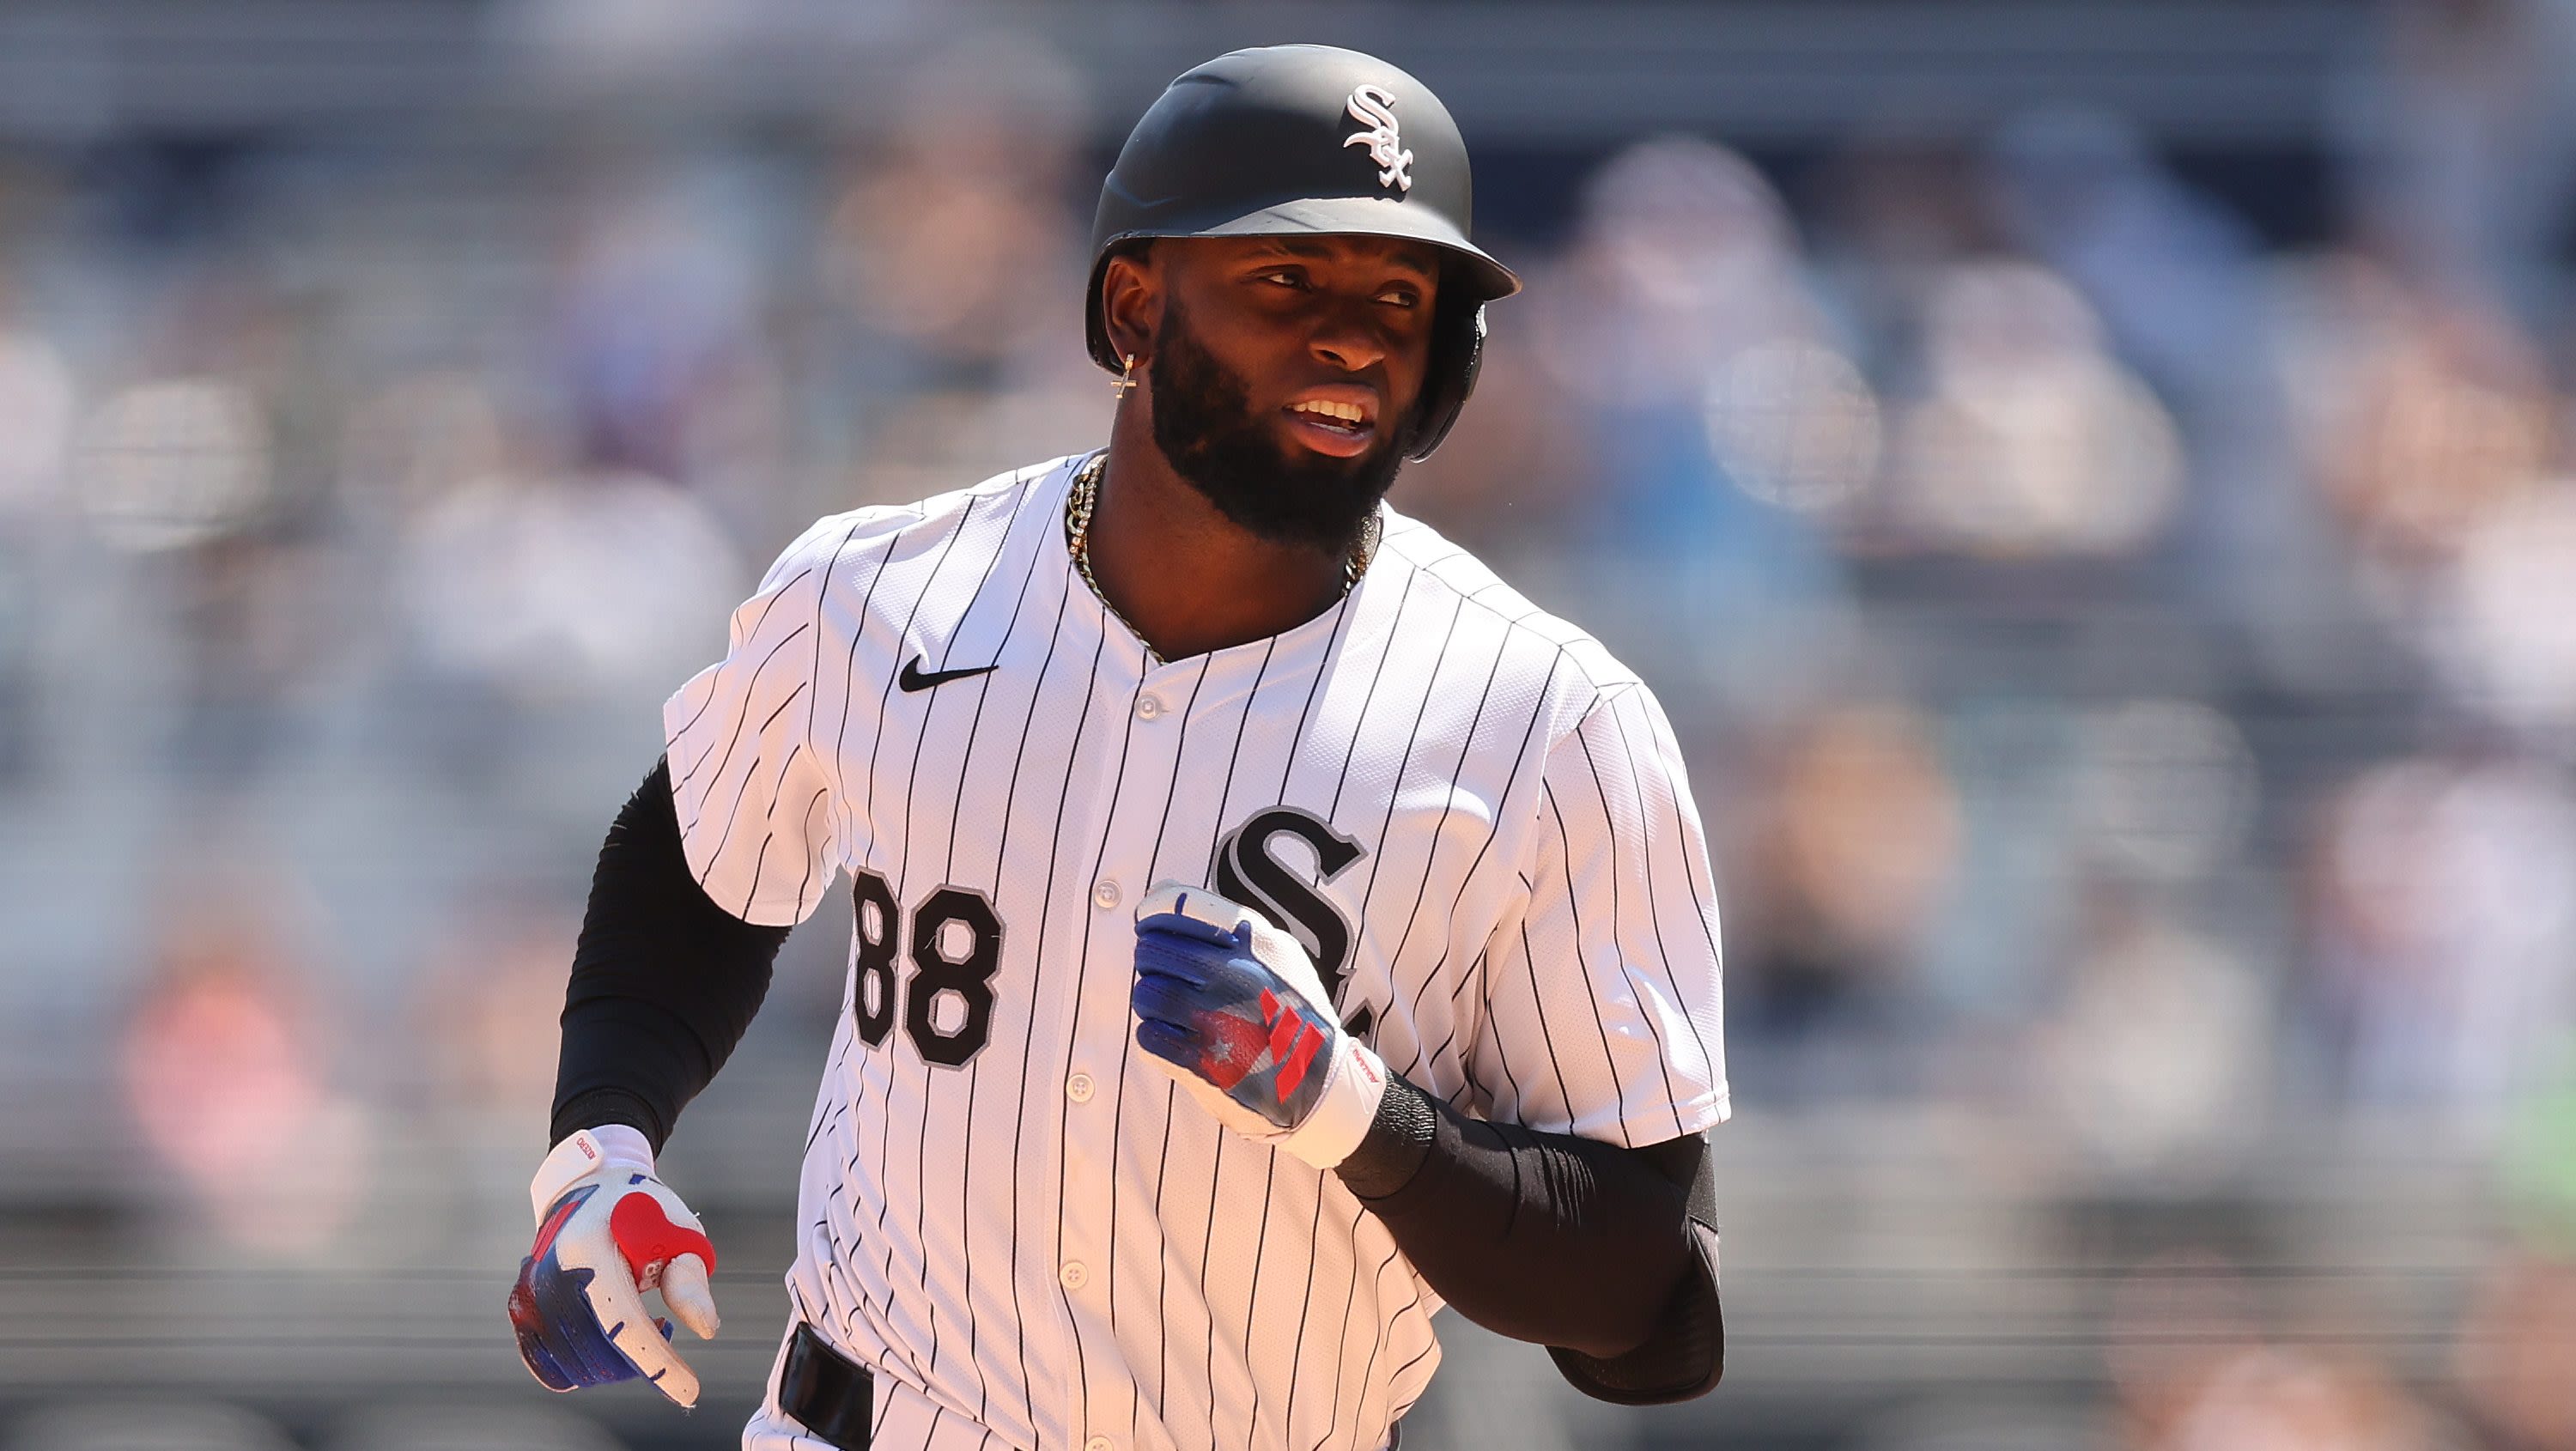 Phillies Trade Proposal Lands White Sox Centerfielder in Deal for 3 Prospects